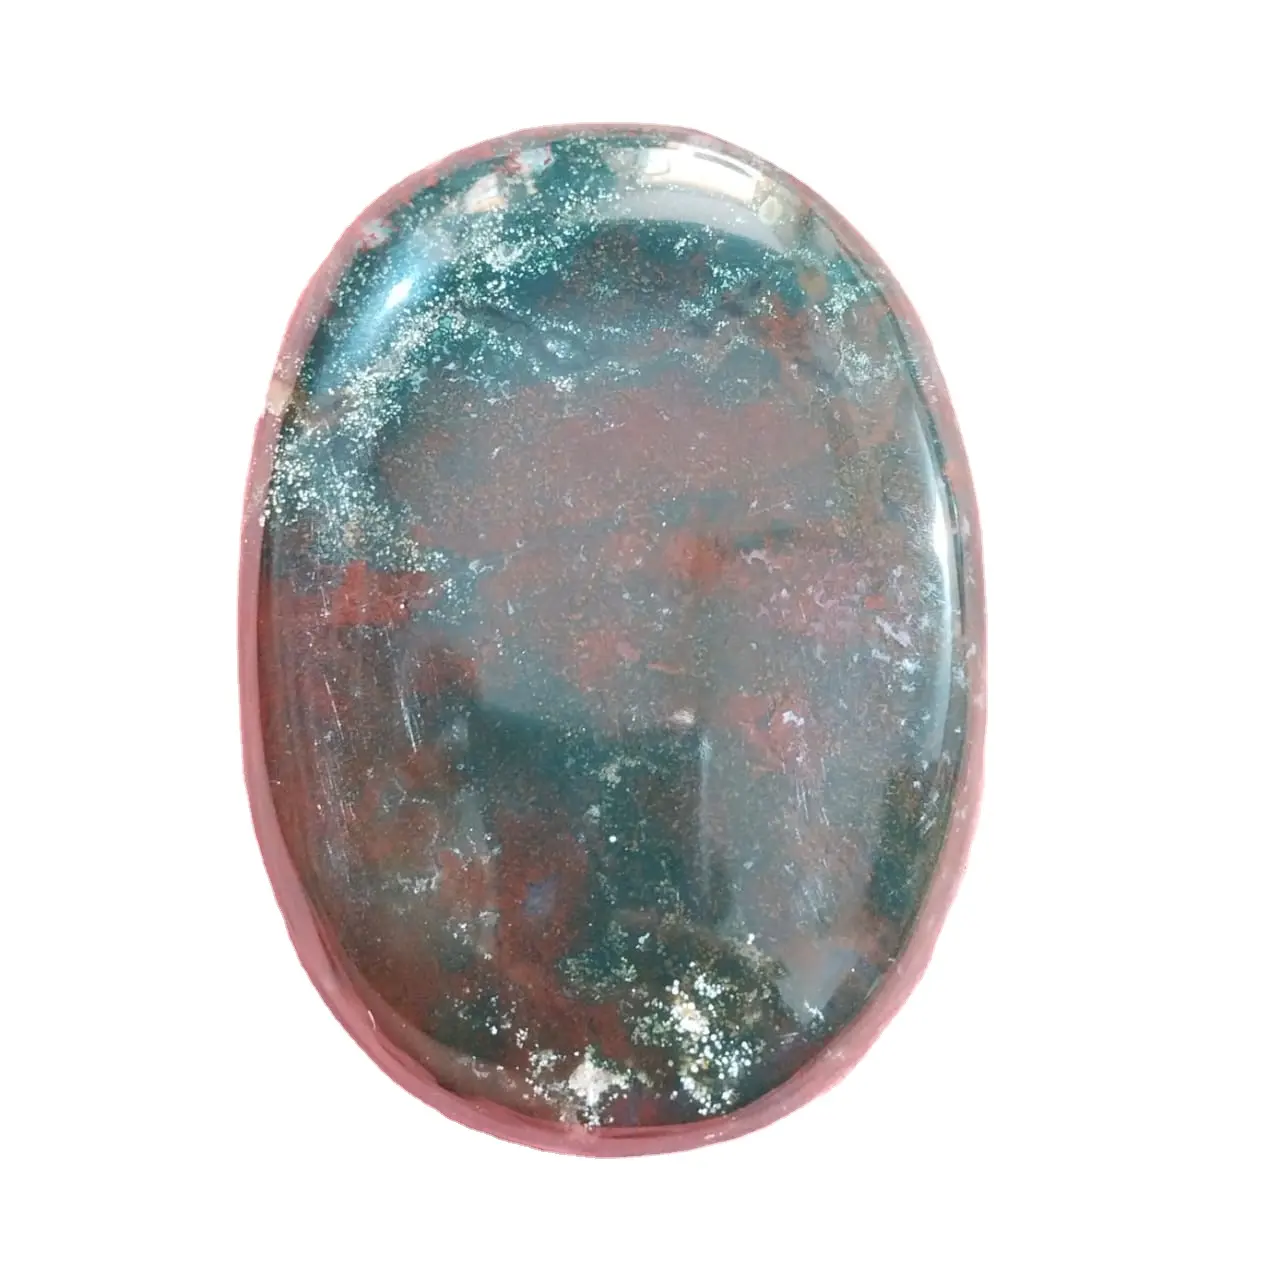 High Quality Bloodstone Palm Stone Gemstone wholesaler Price 100% Natural Palm Stone Manufacturer In India